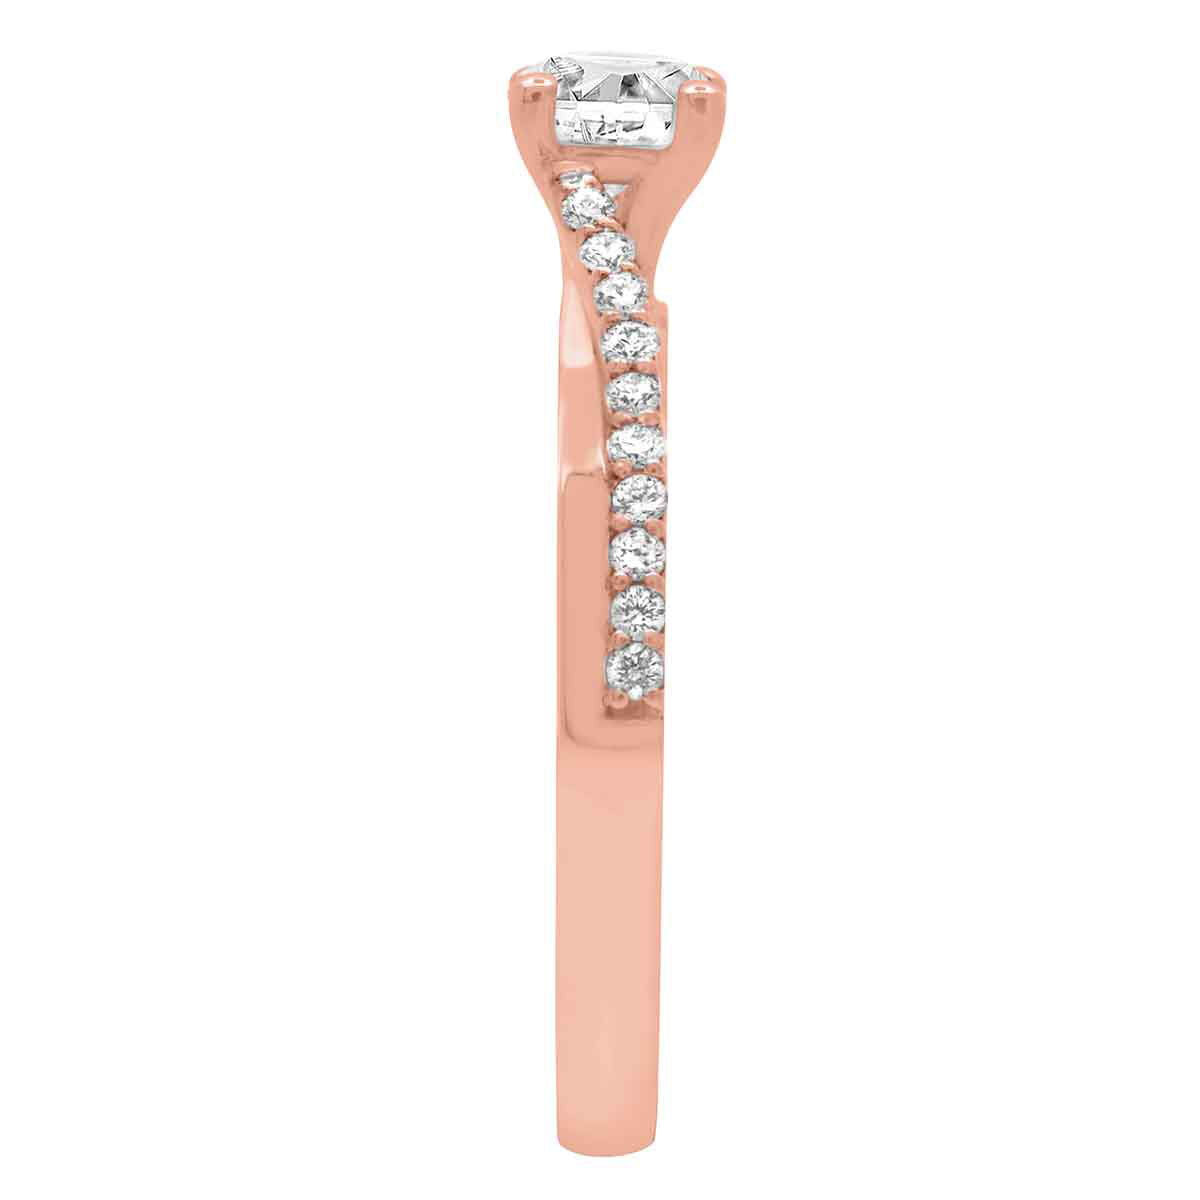 Debeers Promise Ring Style in rose gold standing upright and viewed from the side